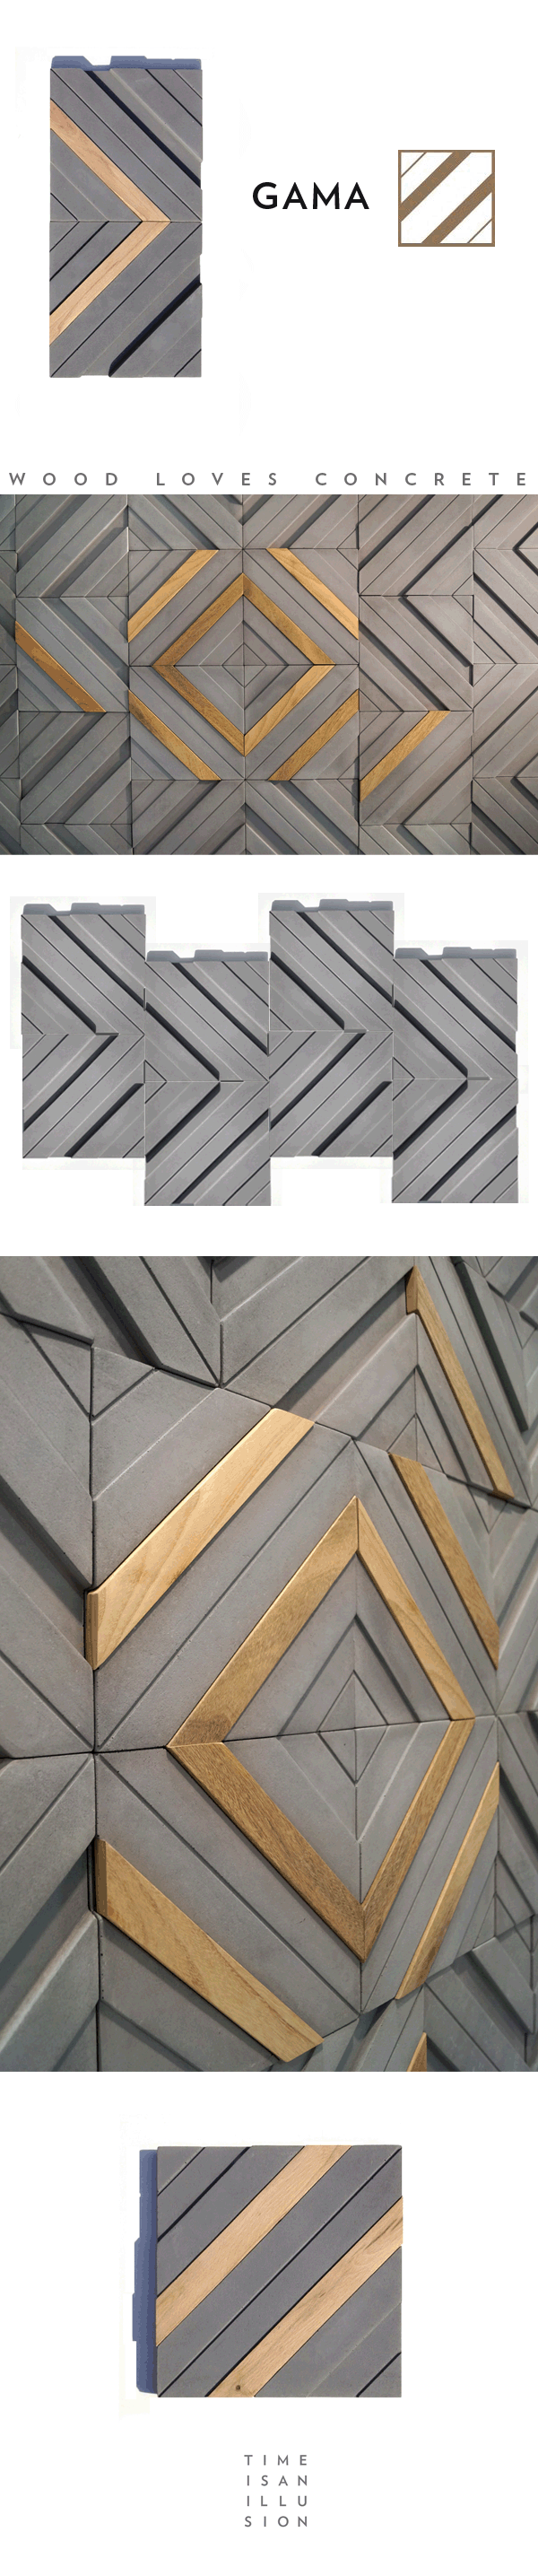 product design interior wall tiles